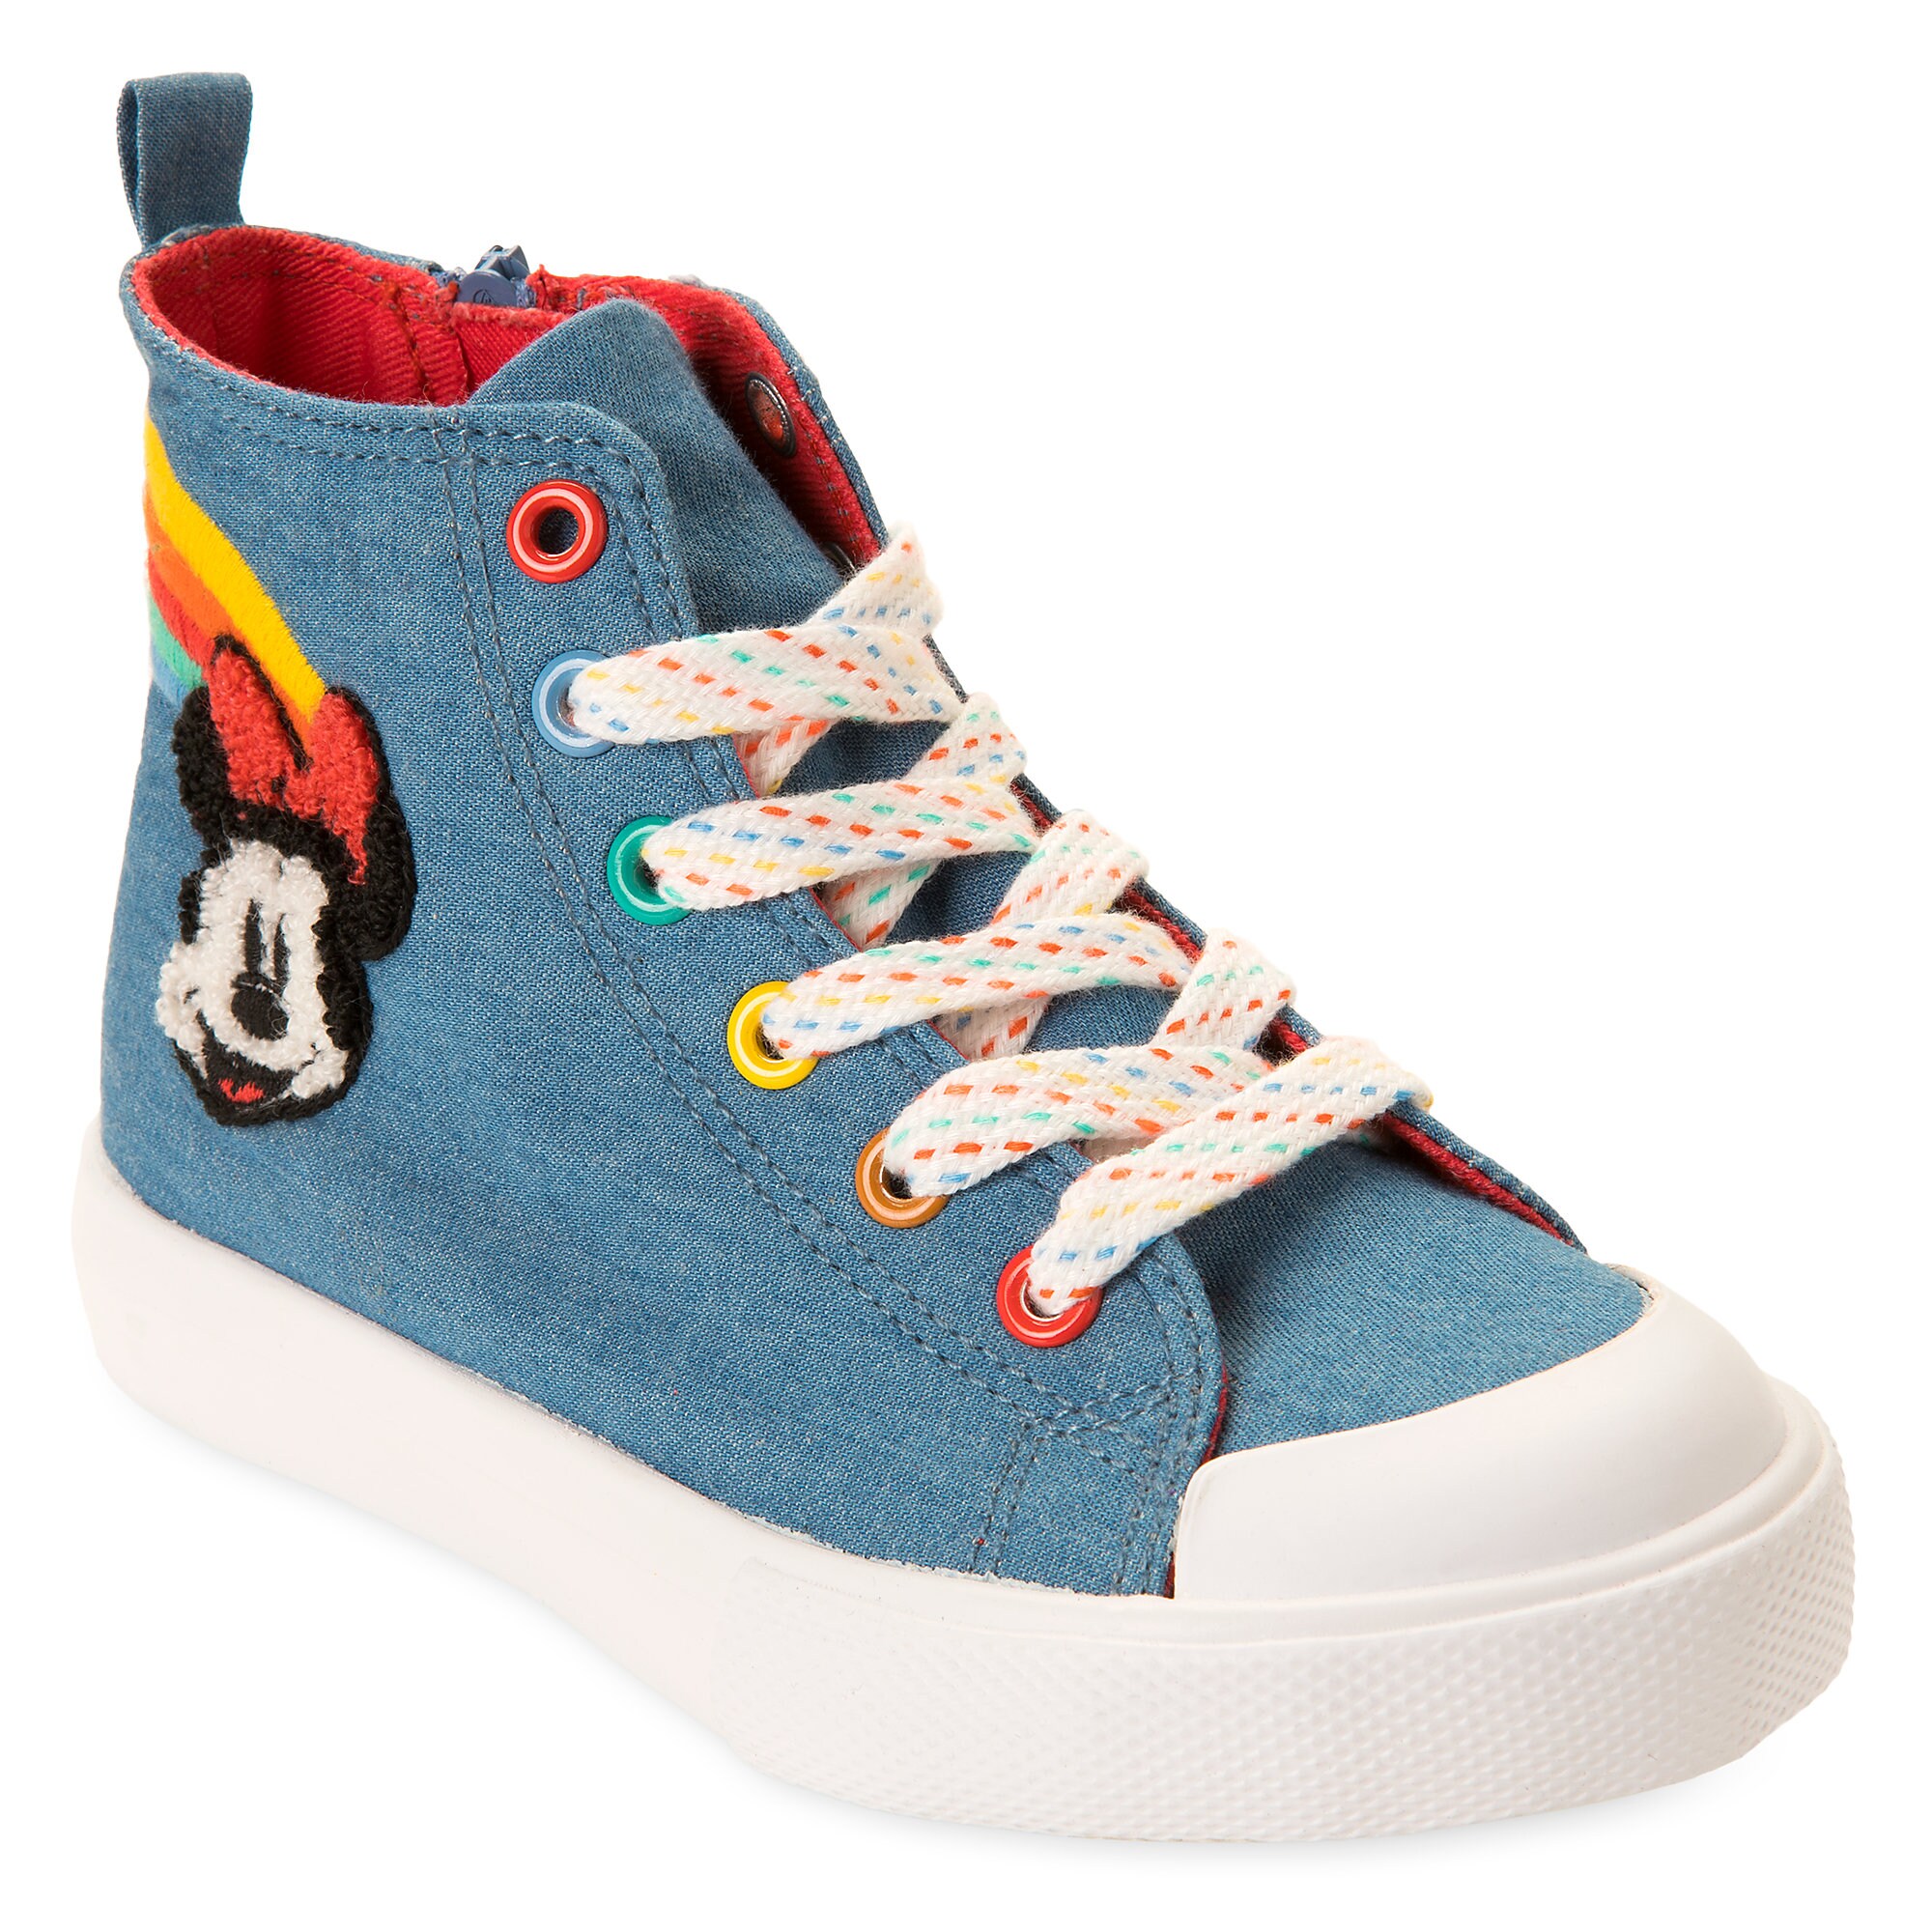 Minnie Mouse High Top Sneakers for Girls